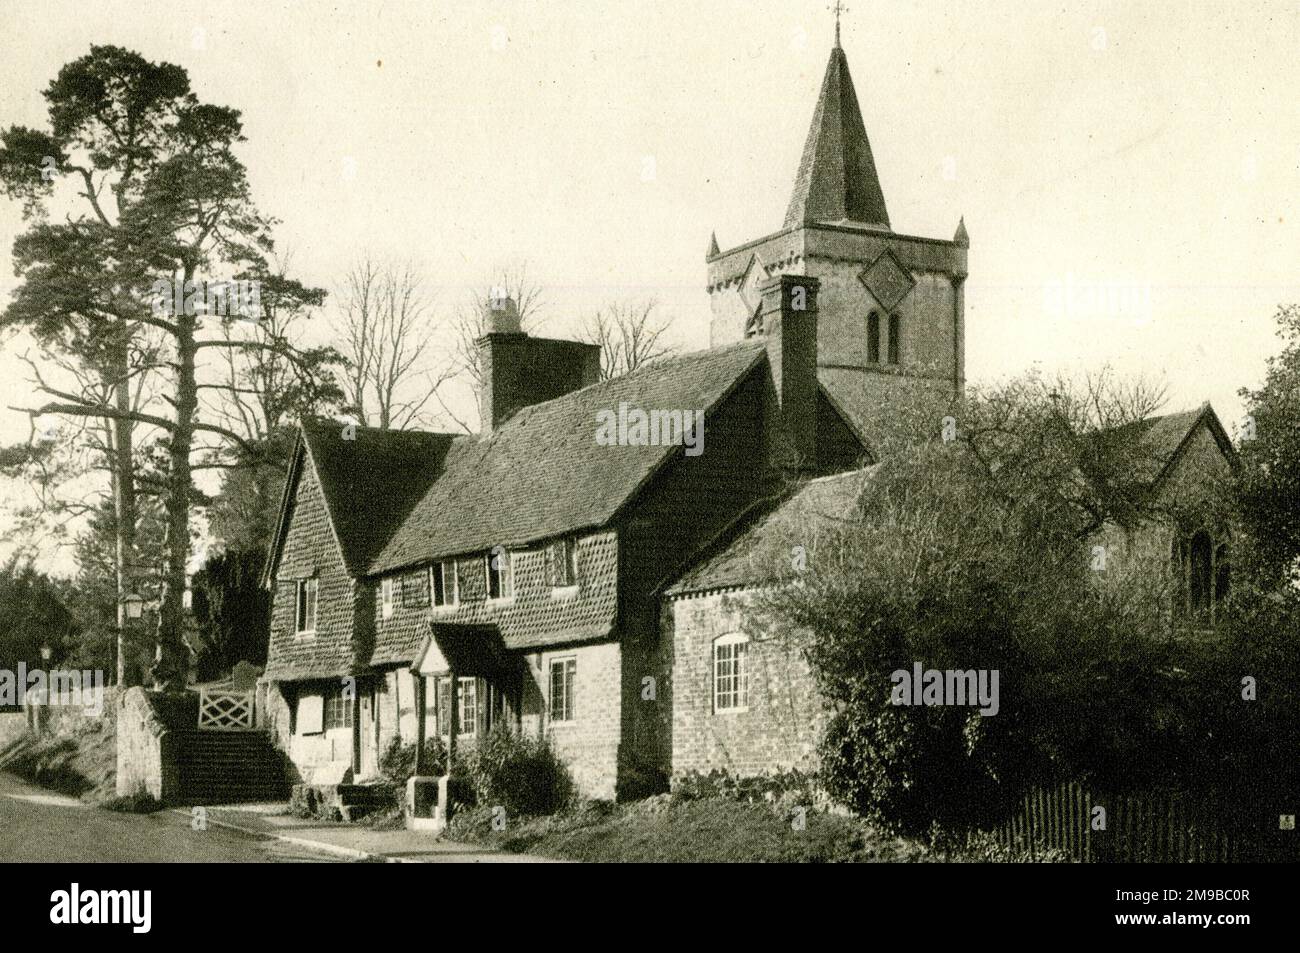 Whitley Church and Village, Surrey Foto Stock